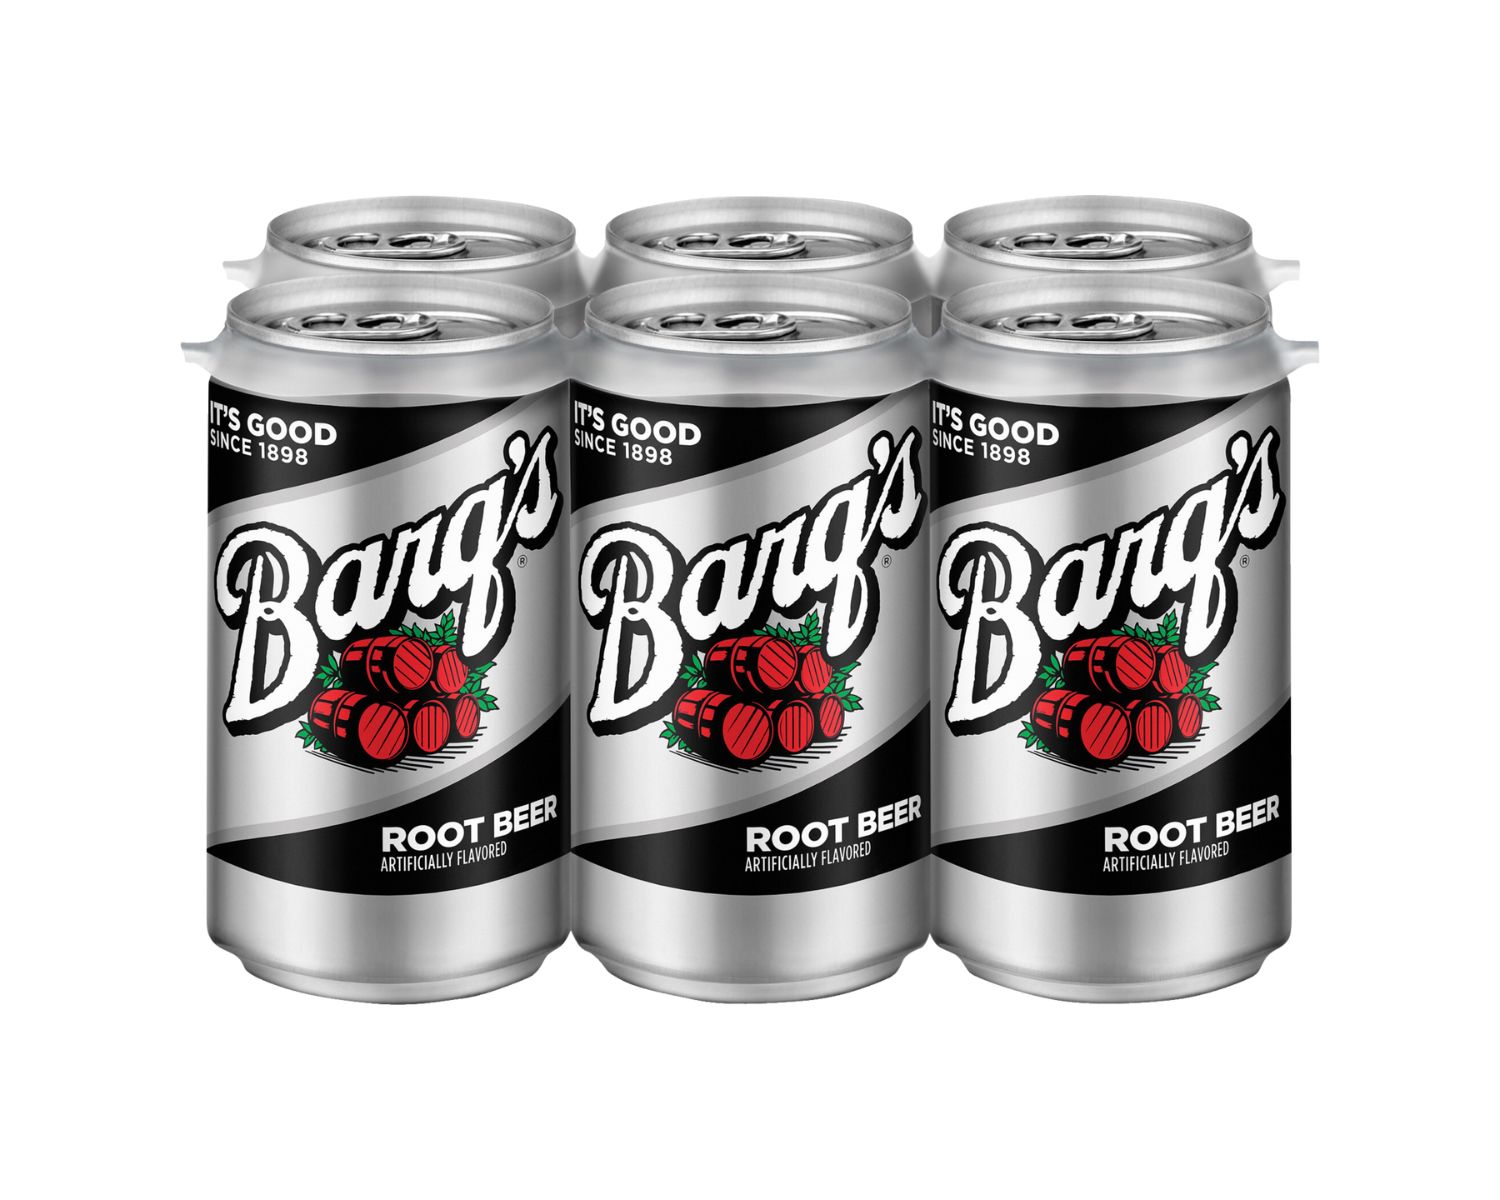 15-barqs-root-beer-nutrition-facts